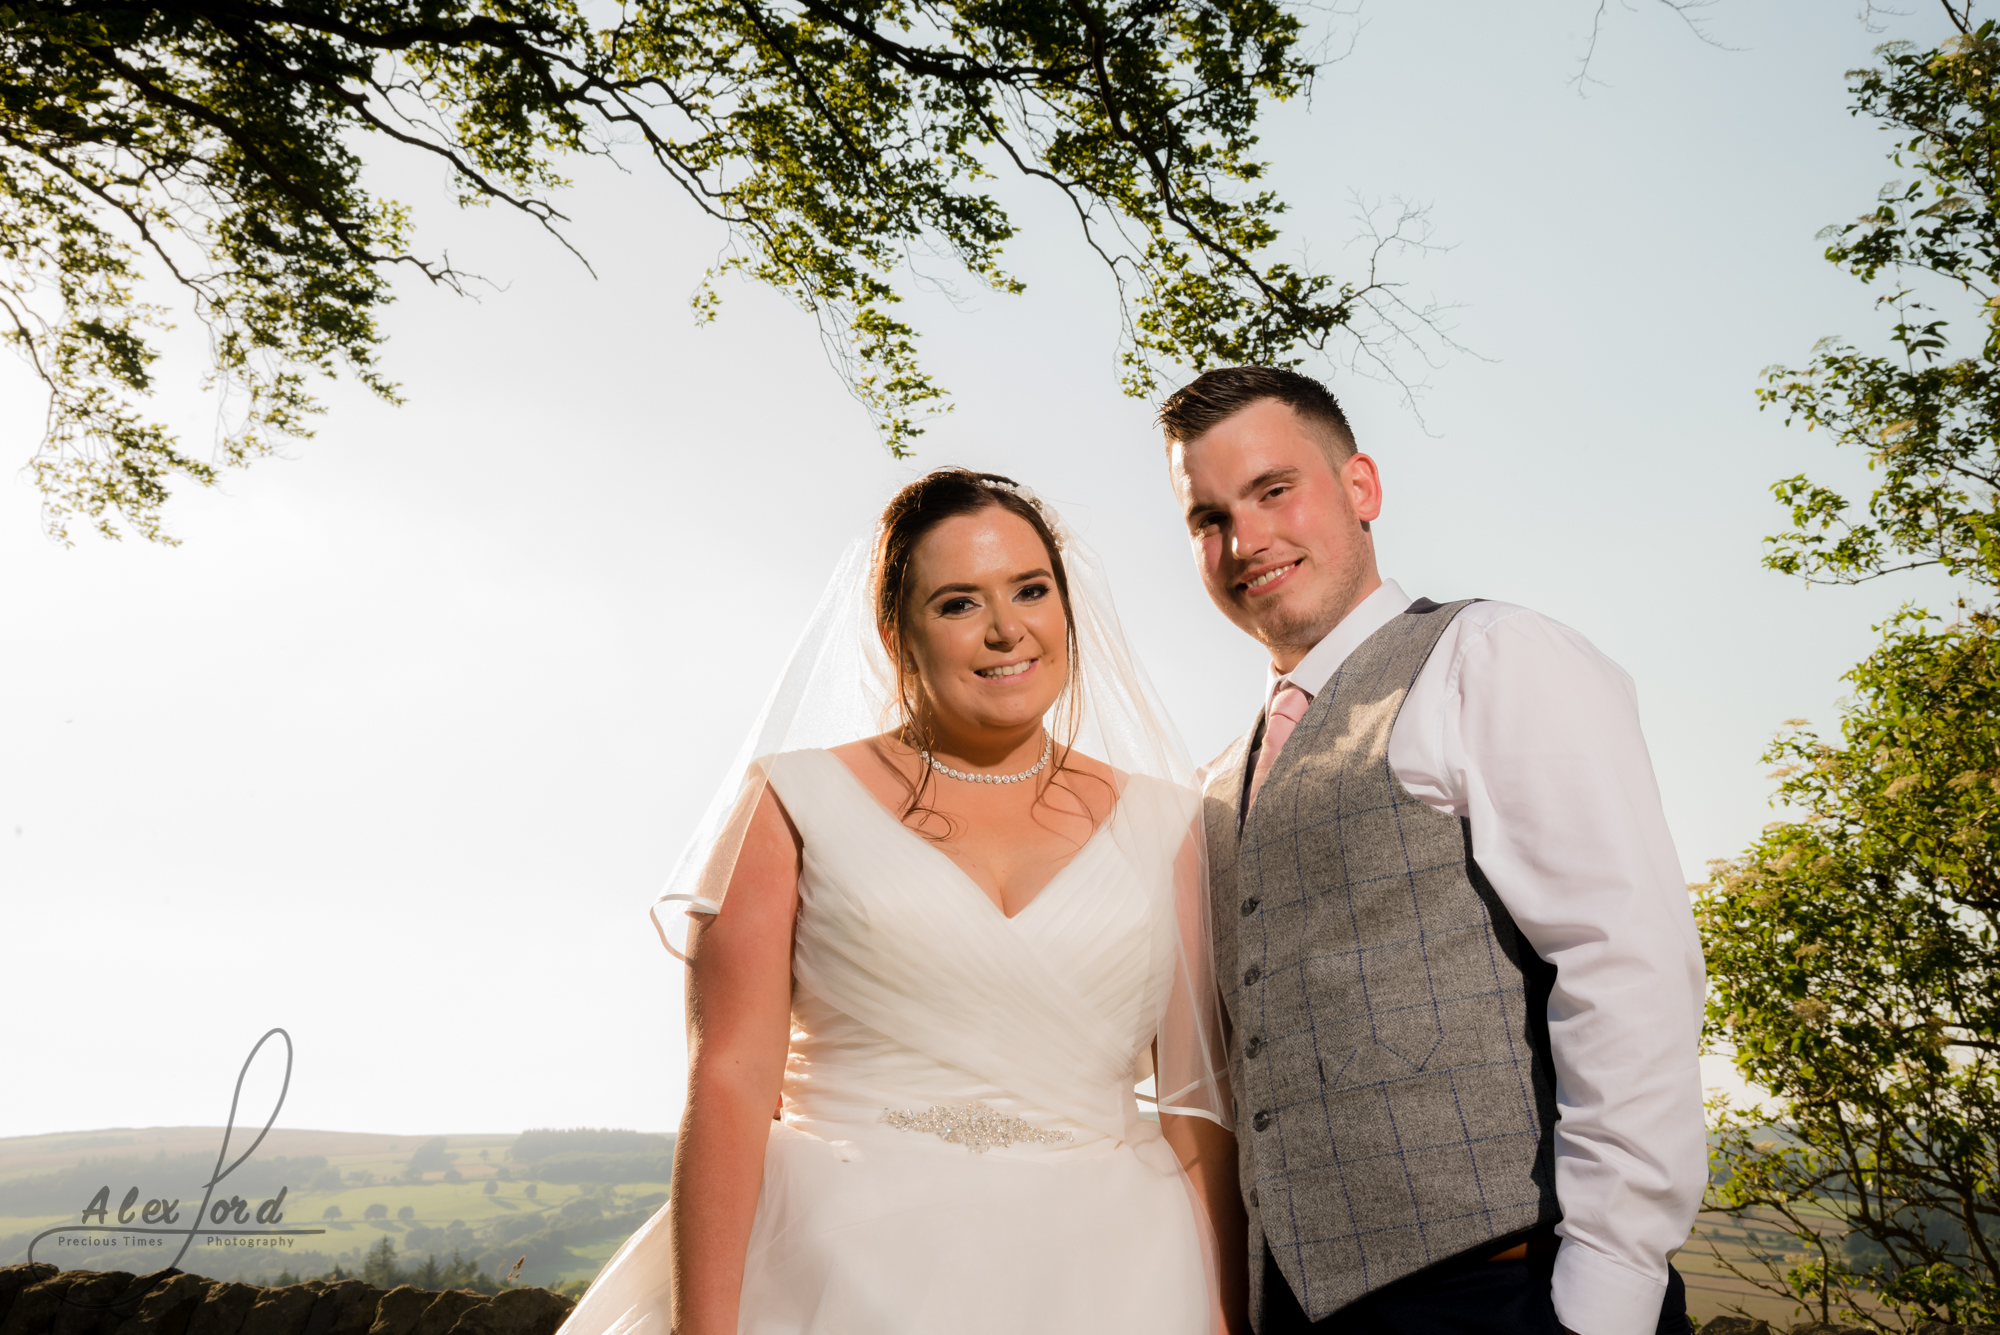 The smiling bride and groom stand in front of a large open sky and the Yorkshire countryside